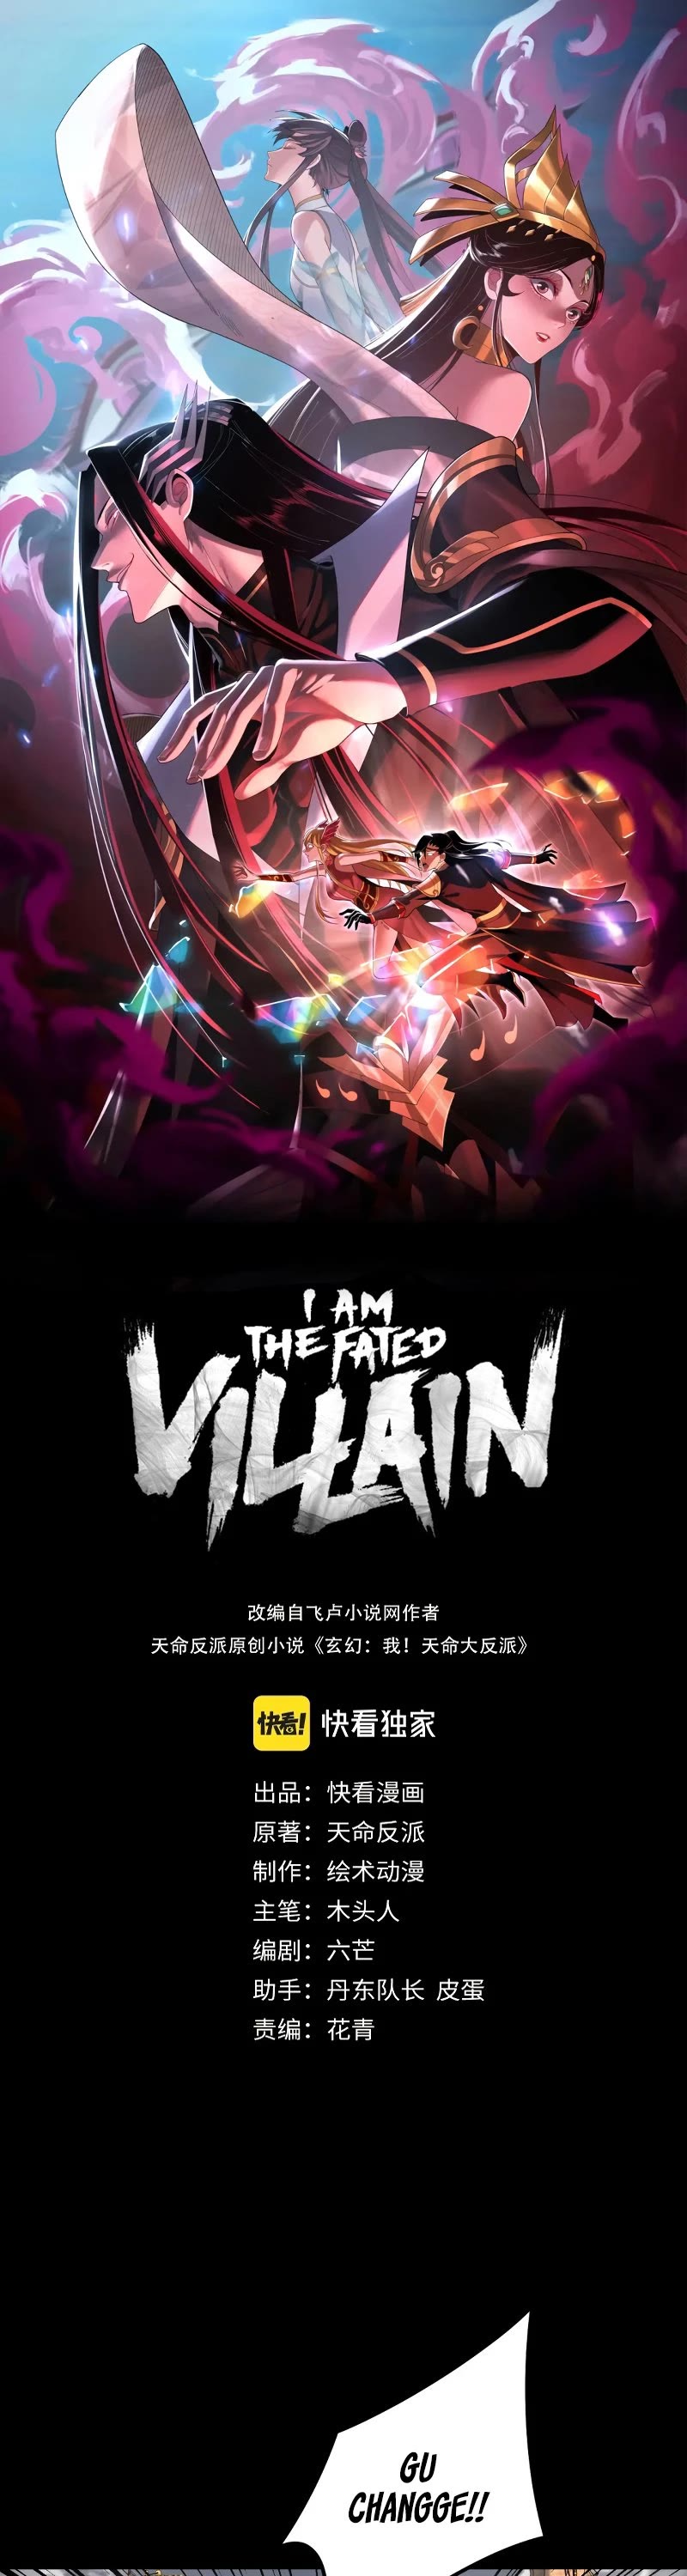 I Am The Fated Villain - Page 2